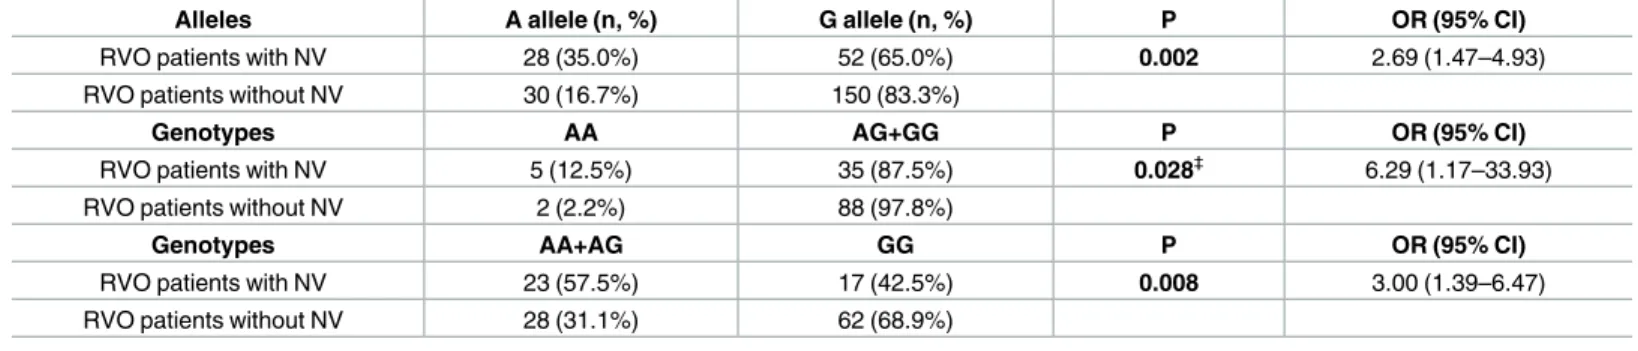 Table 3. SDF1-3’G(801)A allele and genotype frequencies in RVO patients with (n = 40) or without NV (n = 90) and p values of significance regard- regard-ing the comparison between the two groups of RVO patients.